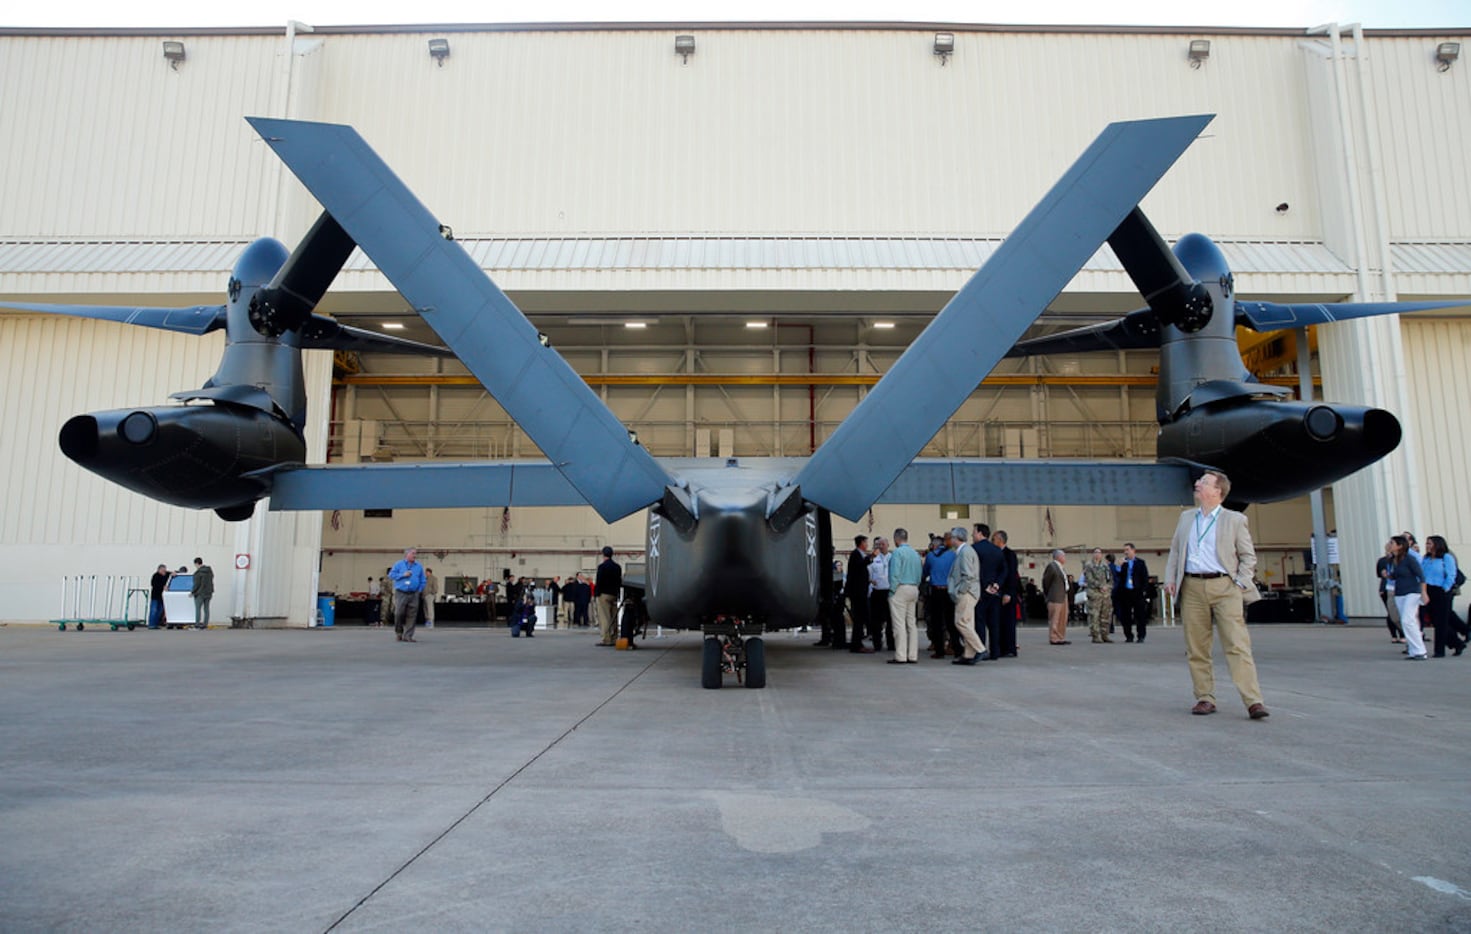 Guests got an up-close look at the V-280 Valor tilt-rotor aircraft after its demonstration...